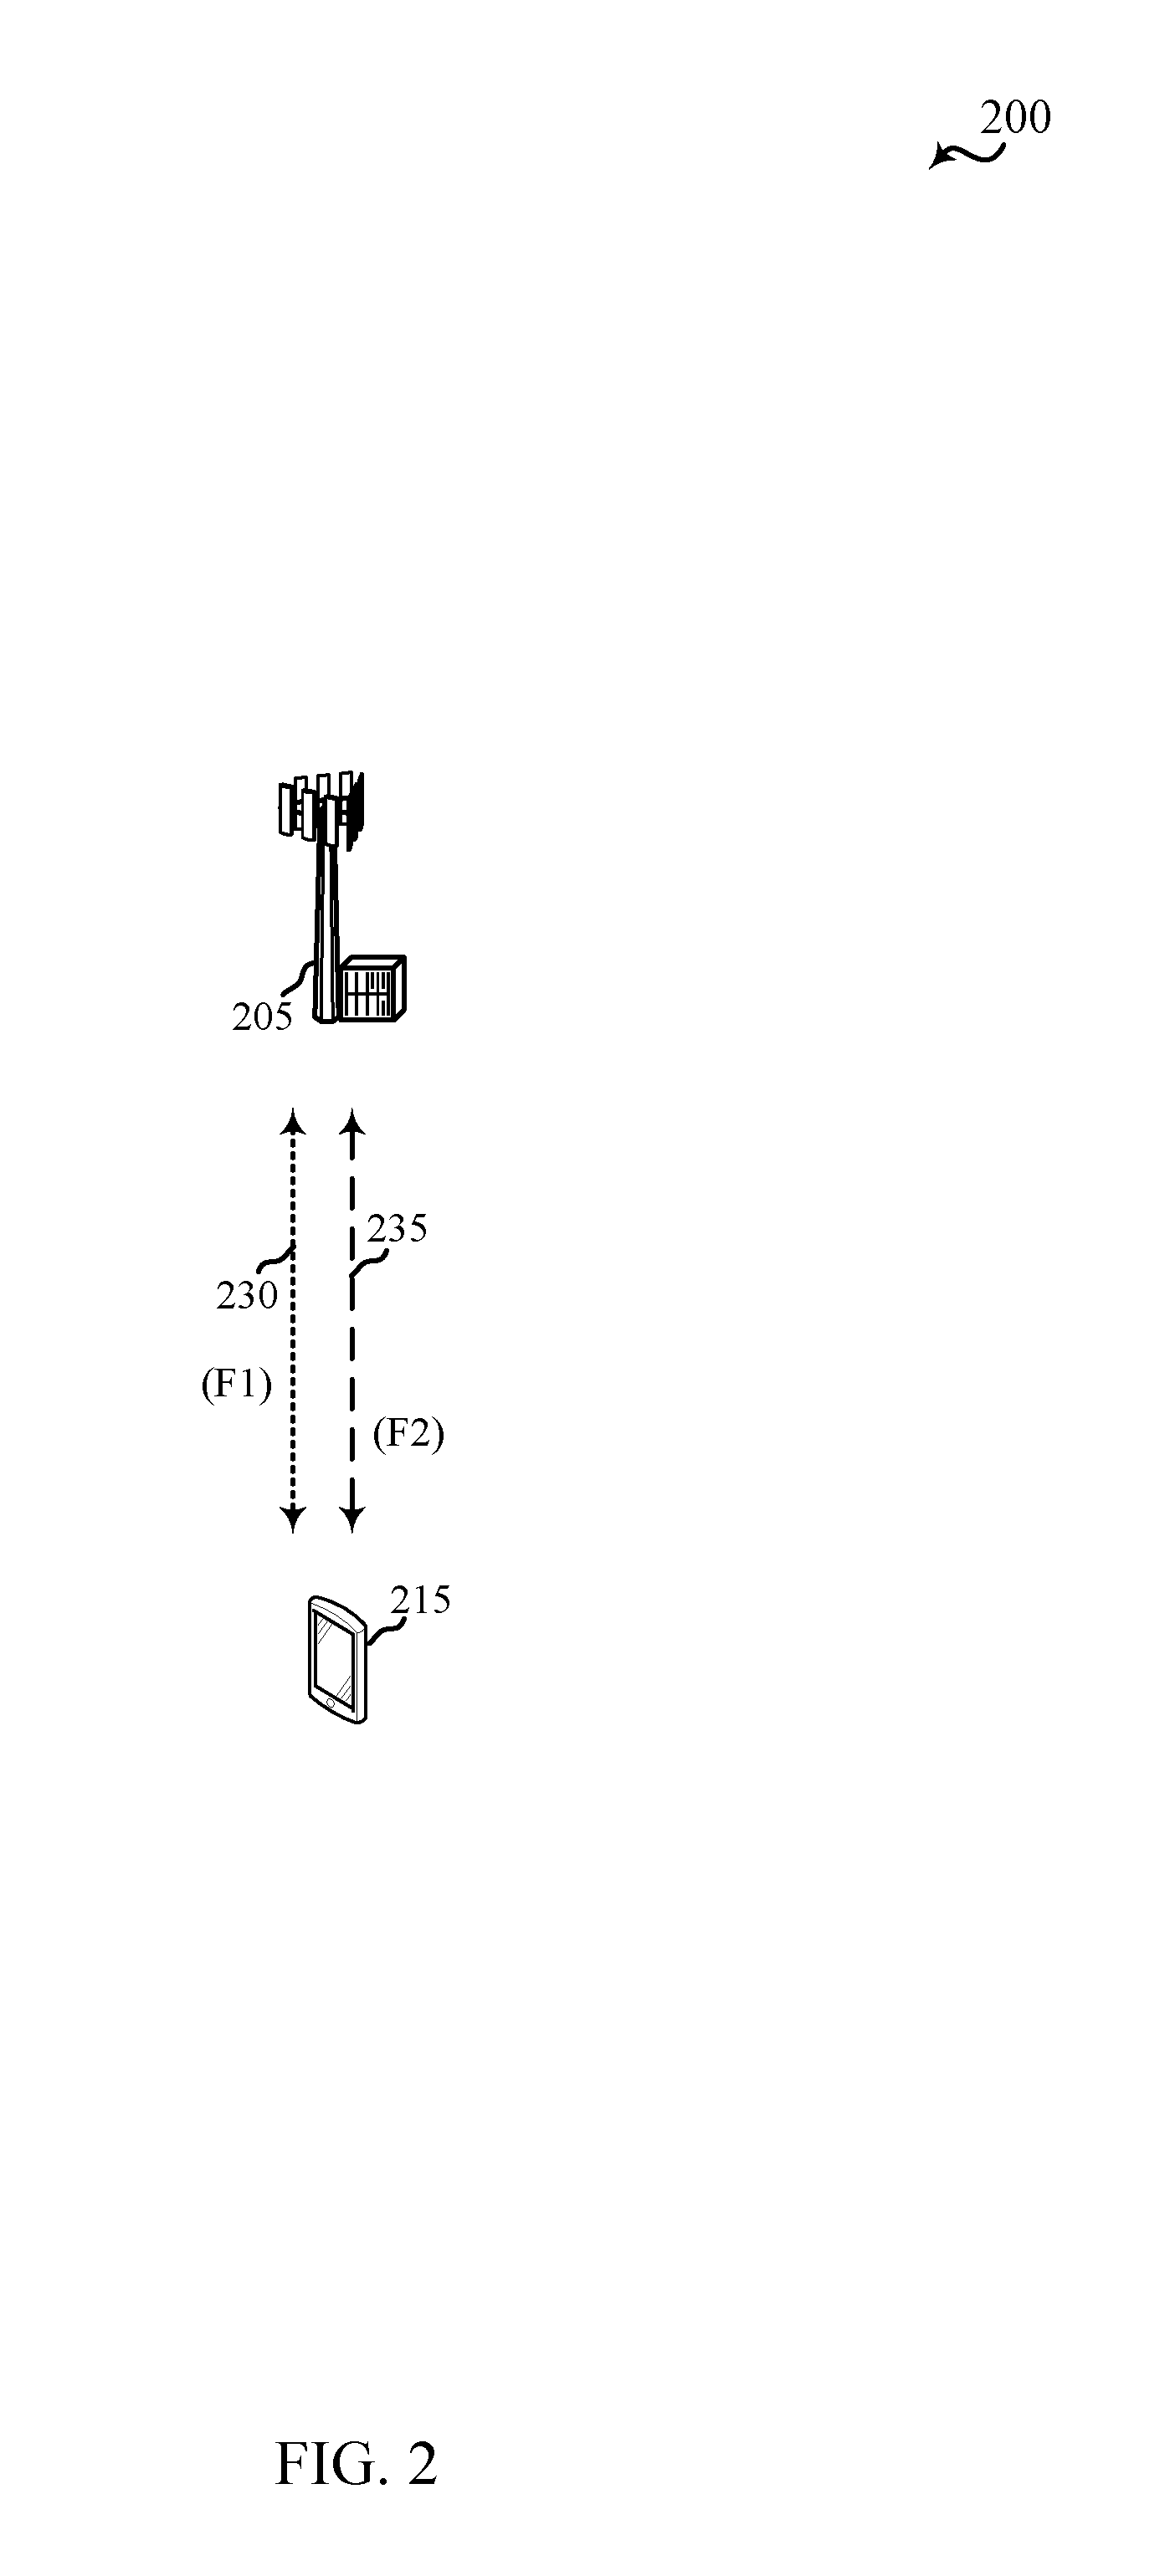 Techniques for managing uplink transmissions in a shared radio frequency spectrum band and a dedicated radio frequency spectrum band